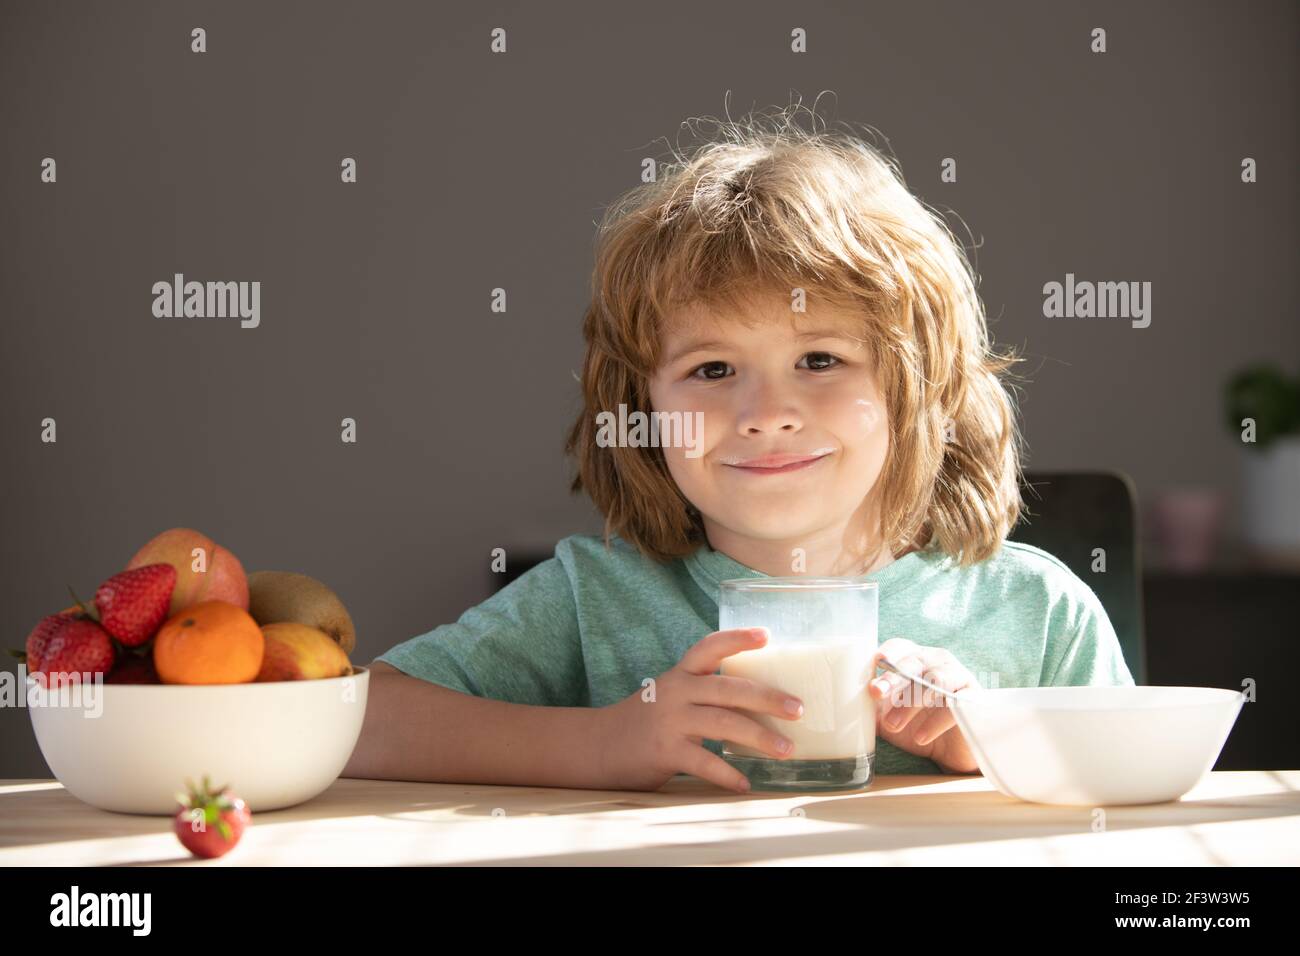 Child with glass of milk eating healthy food. Stock Photo